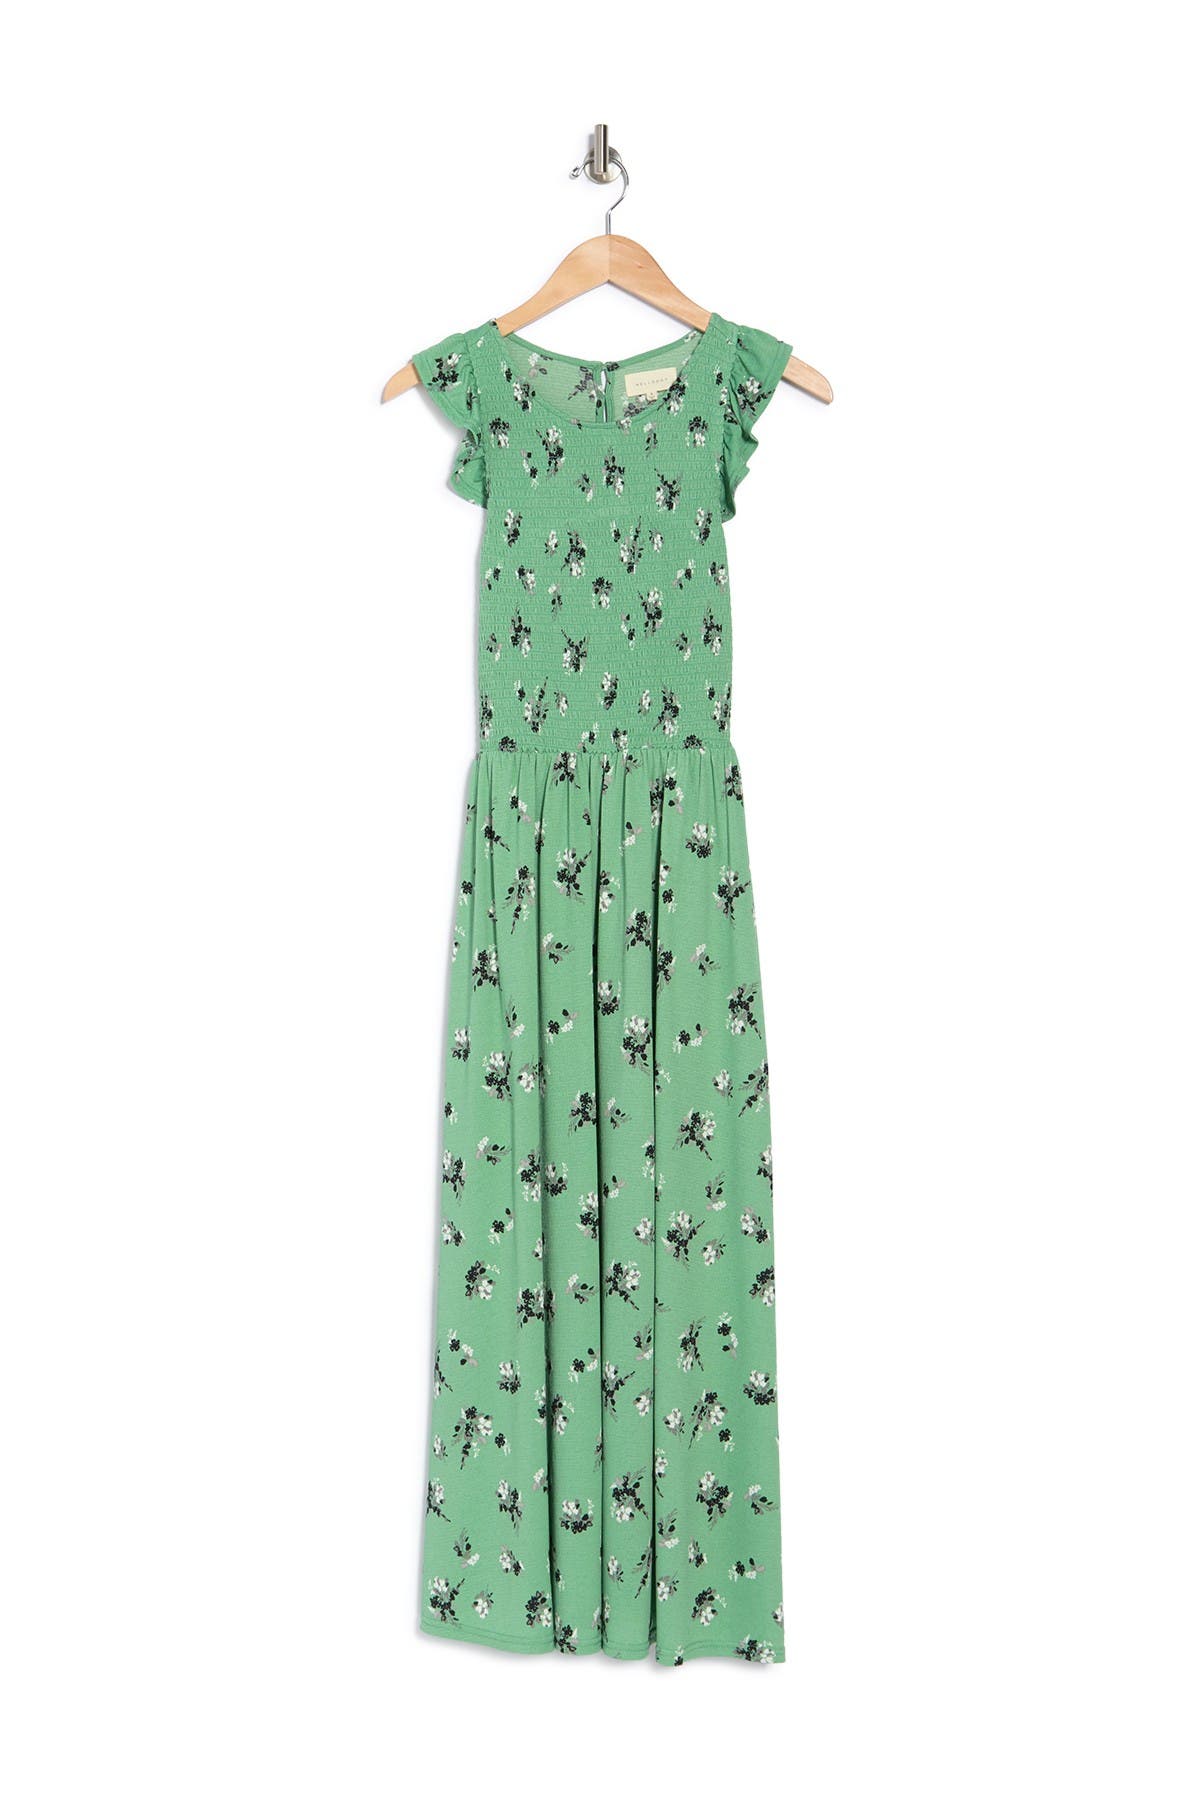 Melloday Sleeveless Floral Print Smocked Top Knit Midi Dress In Sage Floral